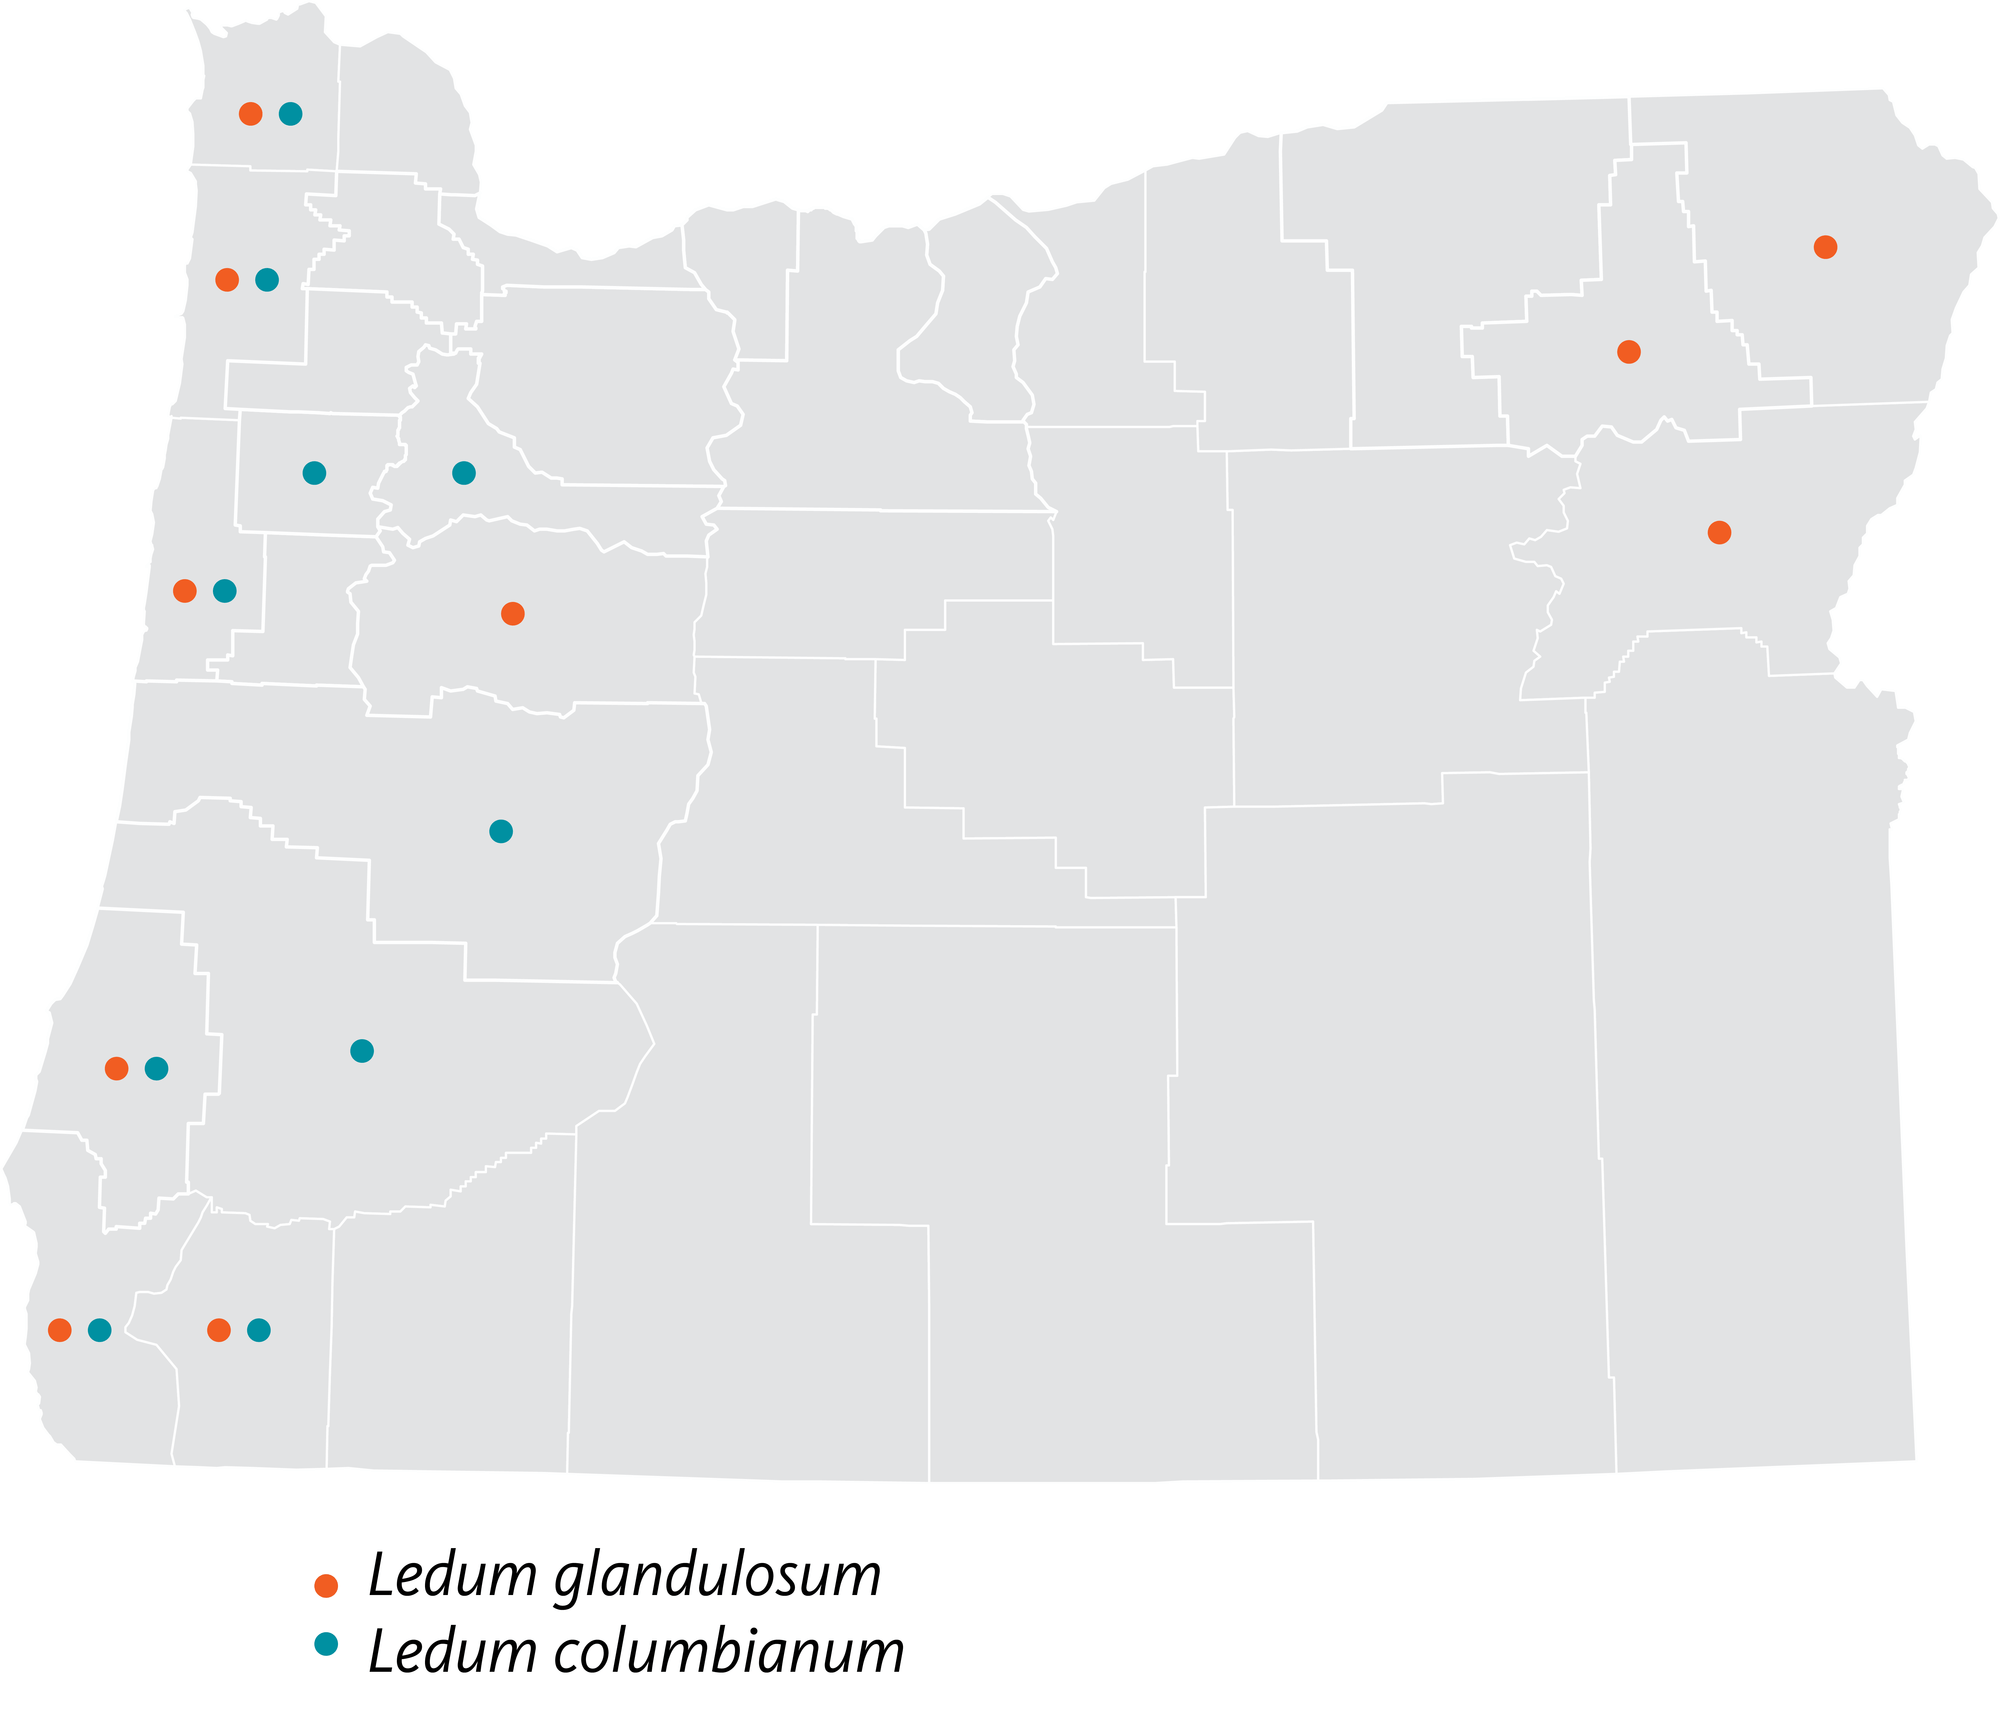 Counties where two varieties of Labrador tea occur in Oregon map